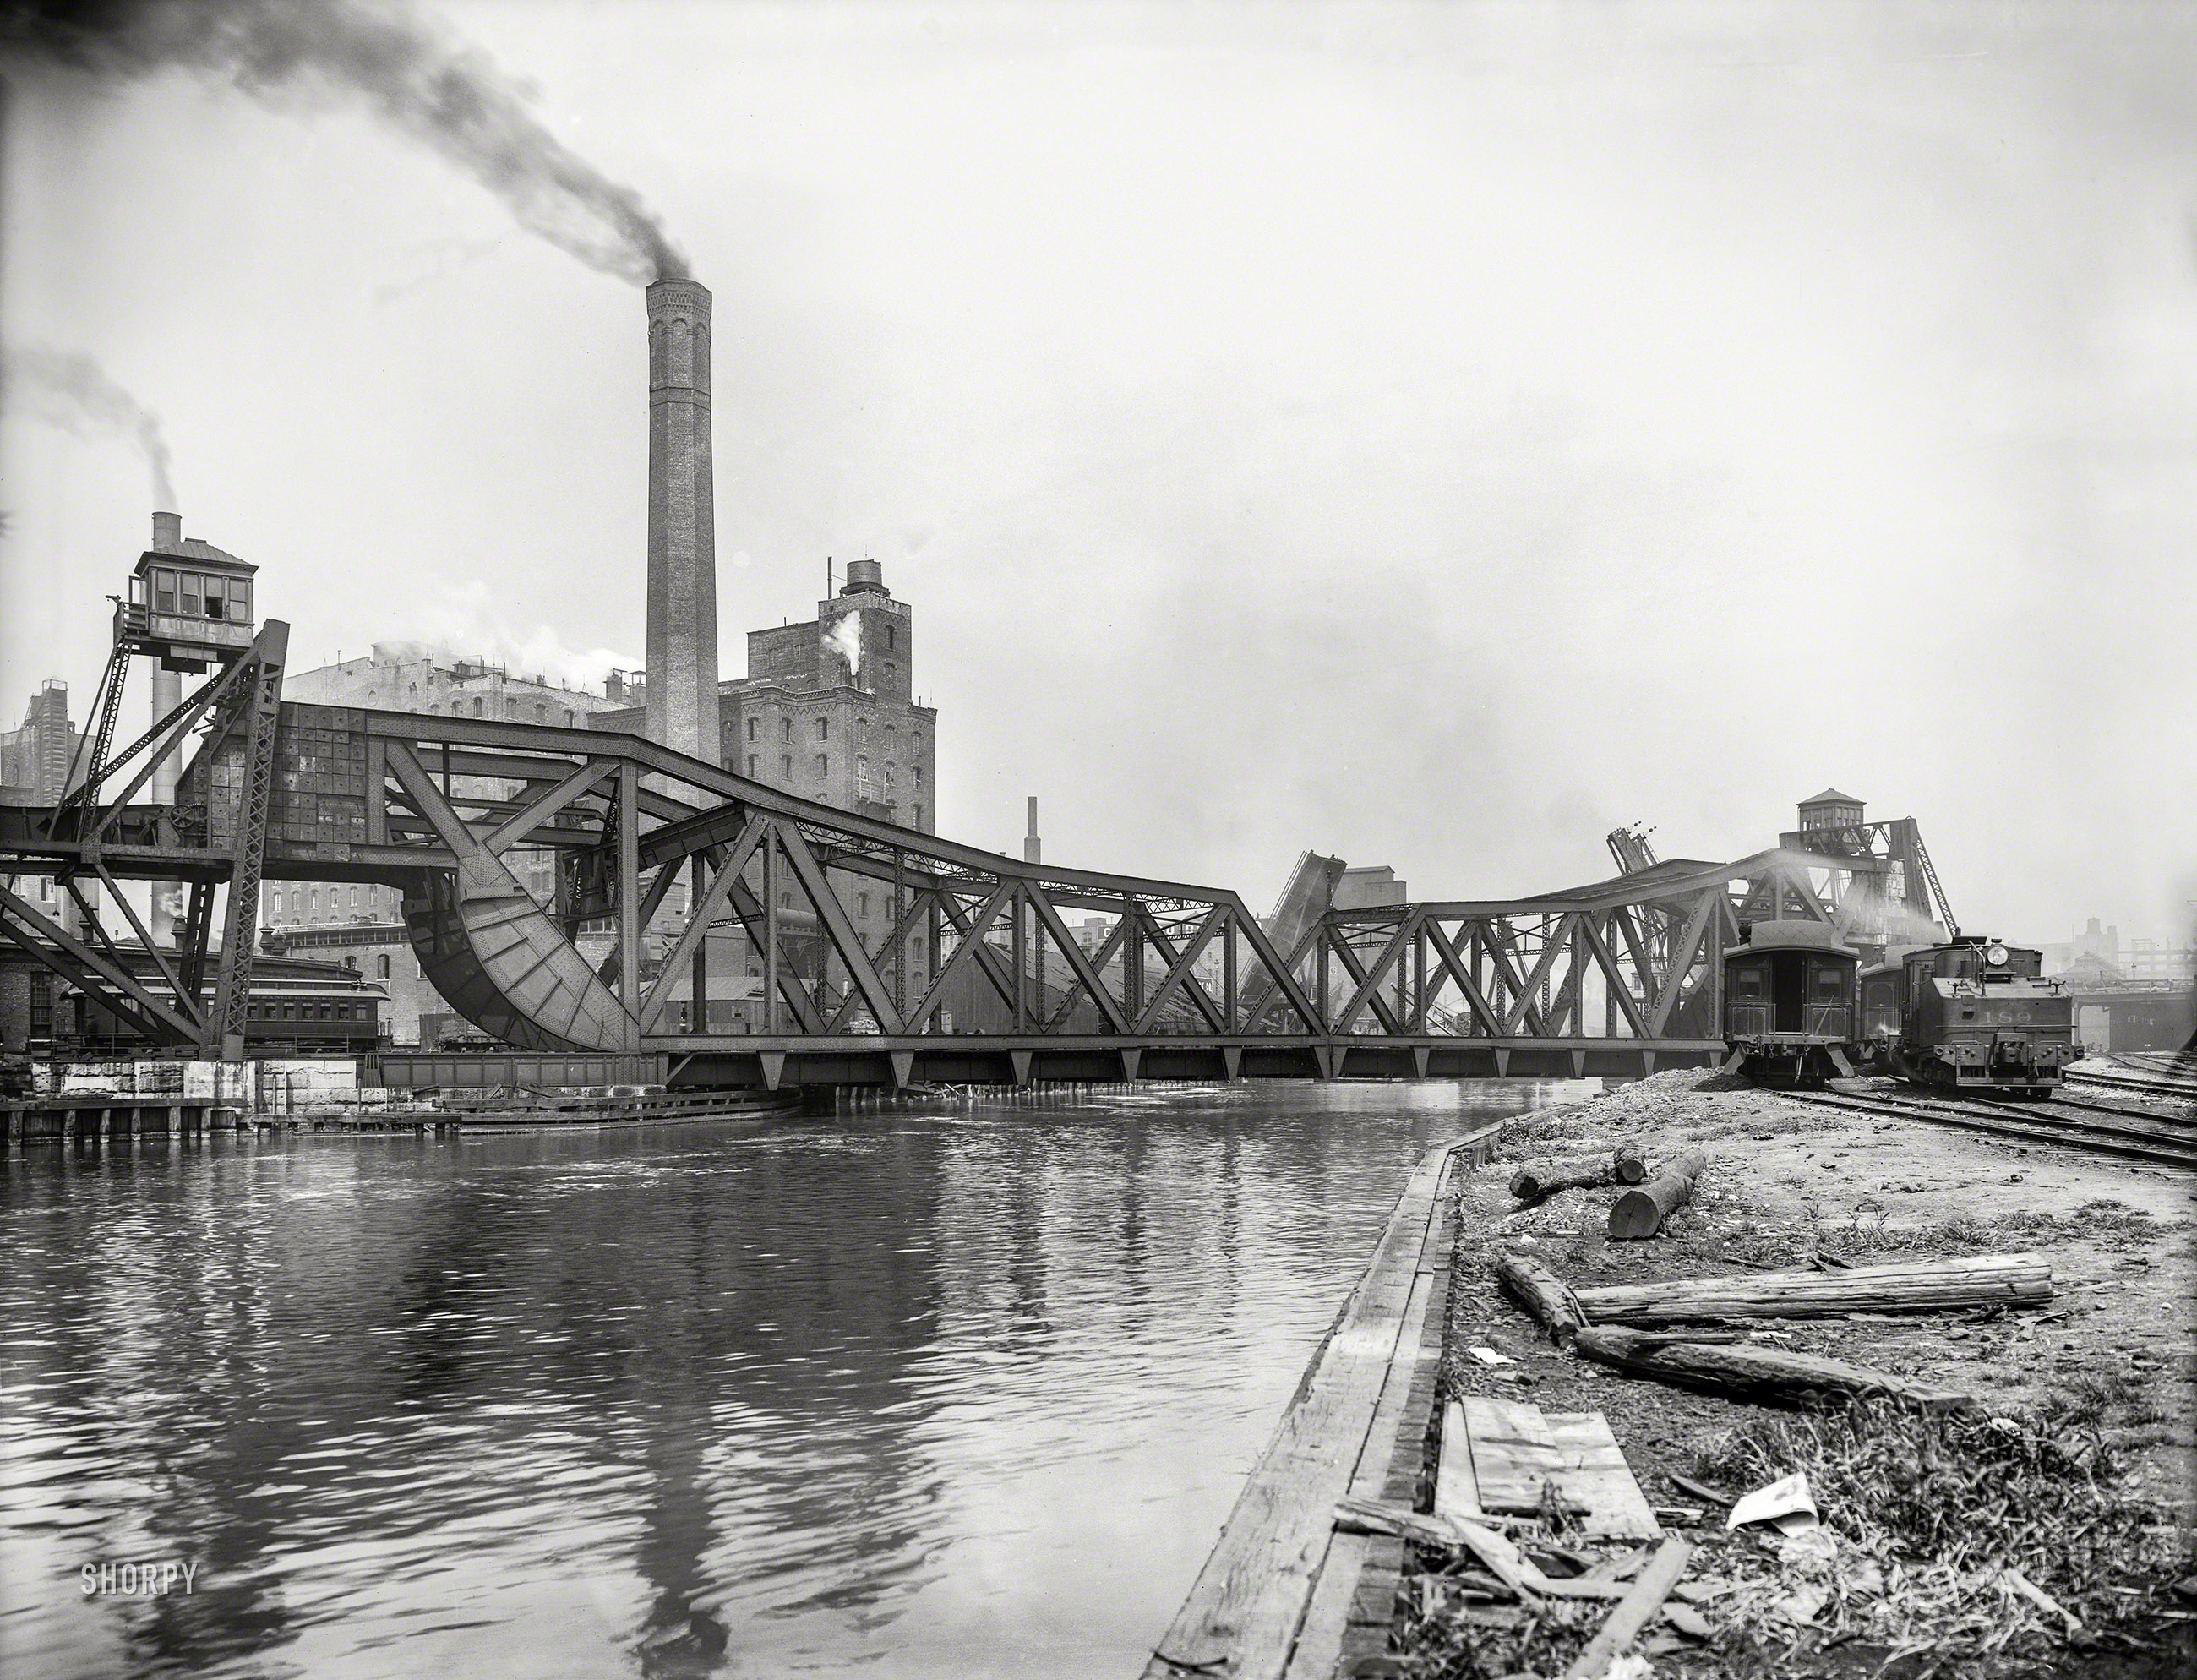 Circa 1905. "Twelfth Street bascule bridge over the Chicago River." 8x10 inch dry plate glass negative, Detroit Publishing Company. View full size.